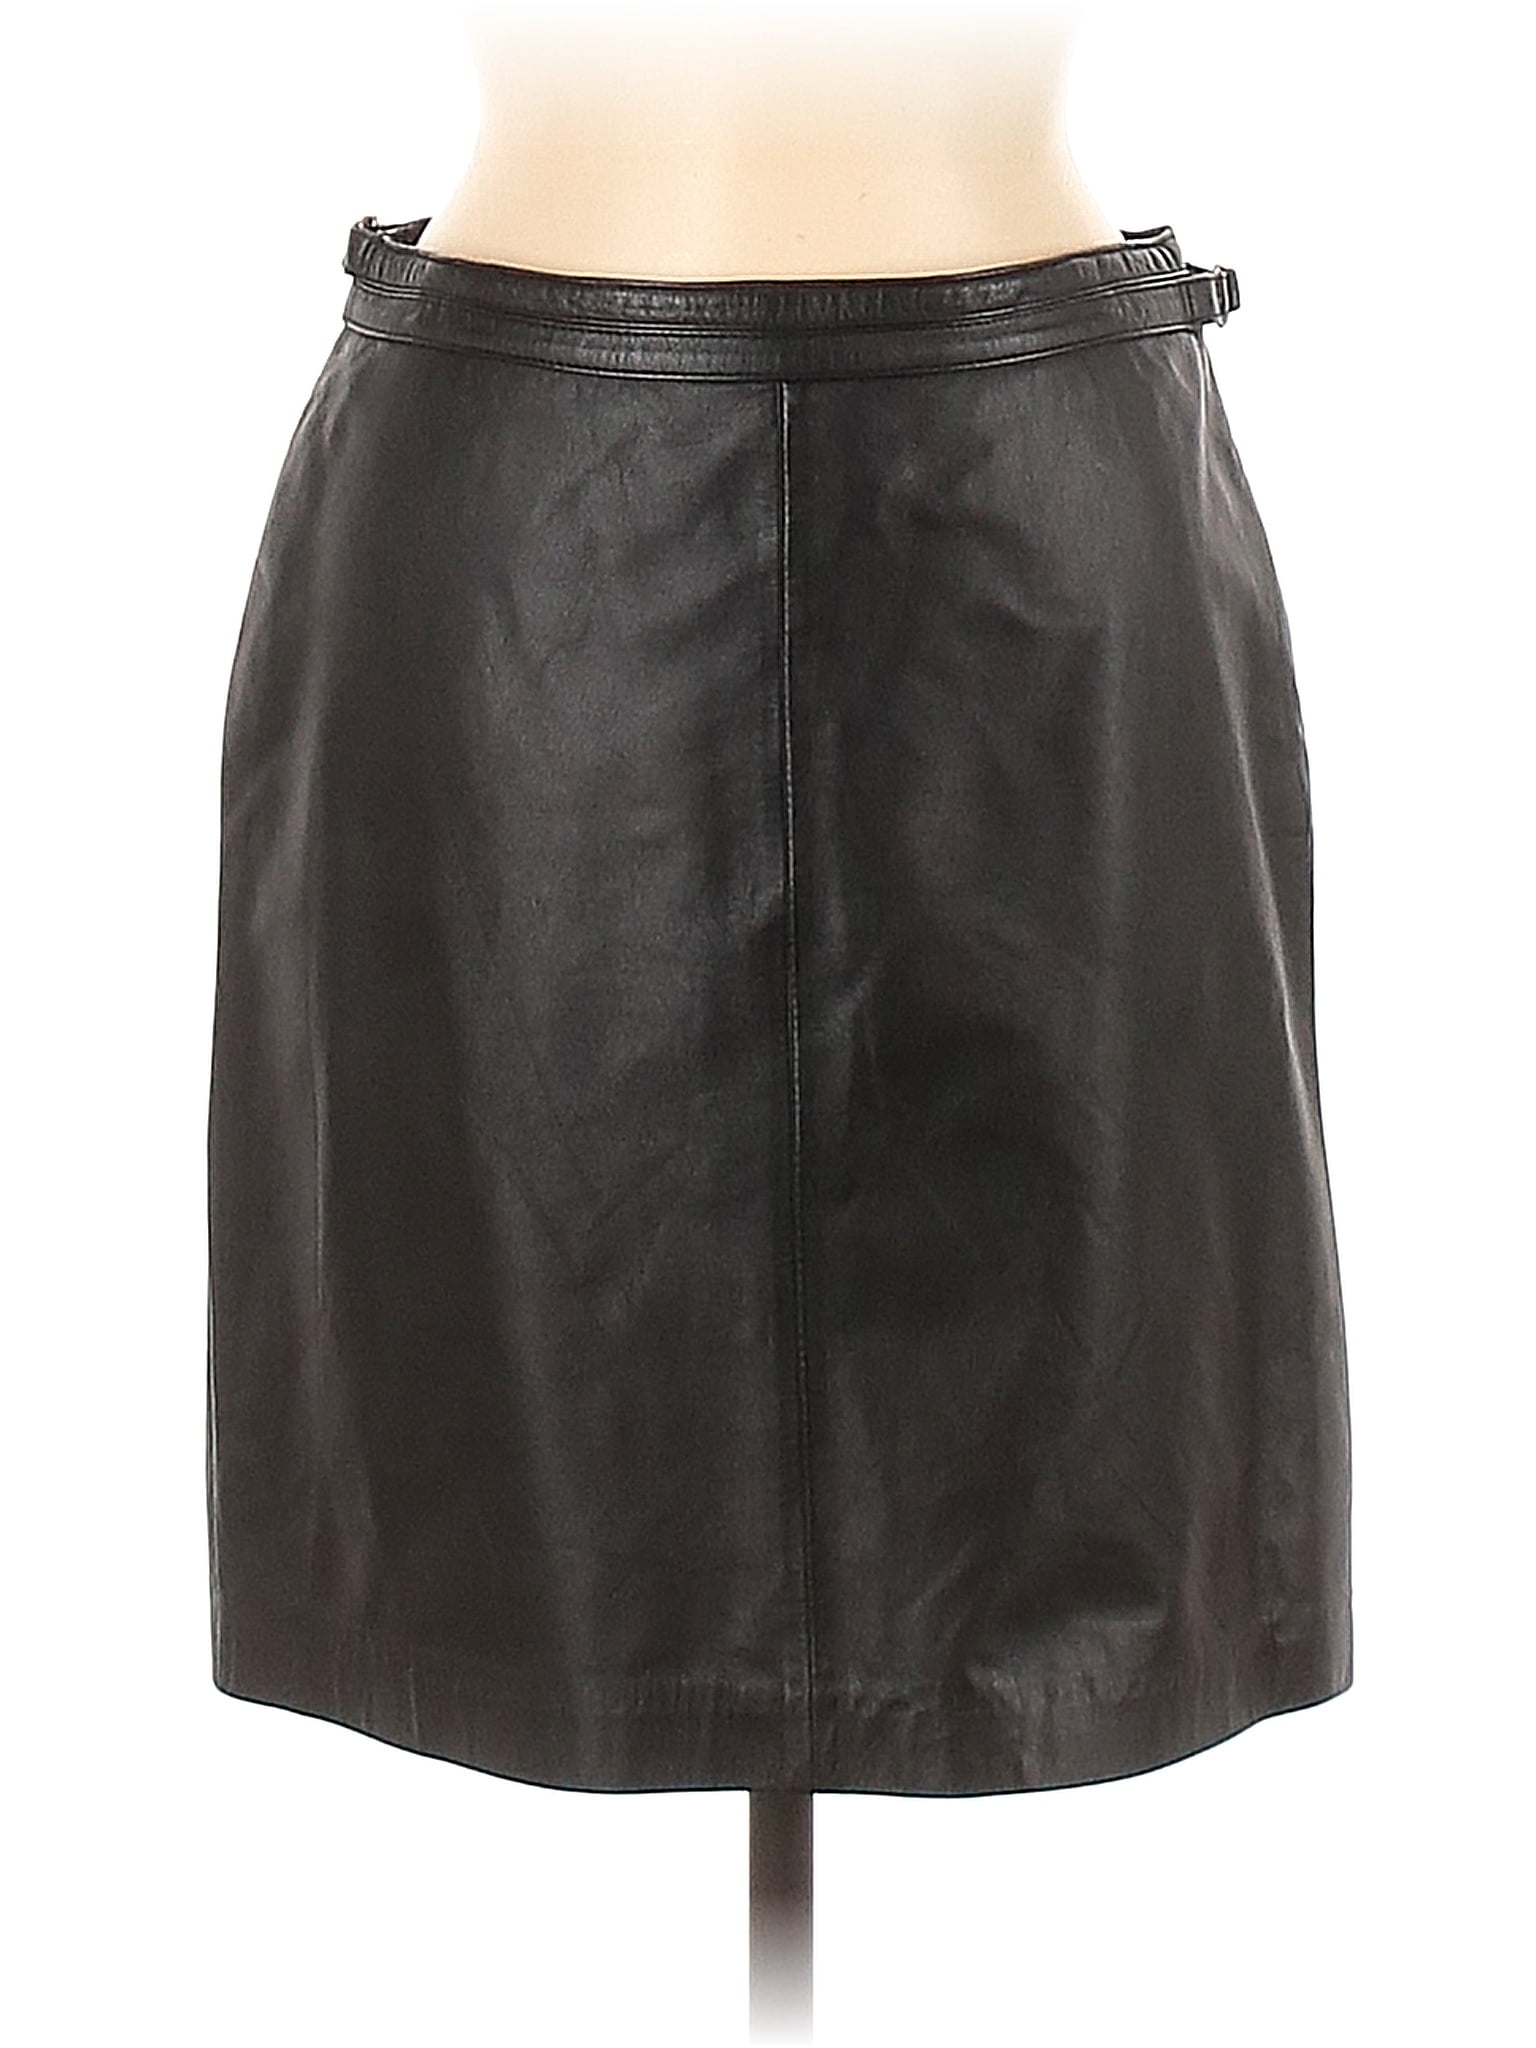 Ralph by Ralph Lauren 100% Cotton Solid Black Leather Skirt Size 6 - 67 ...